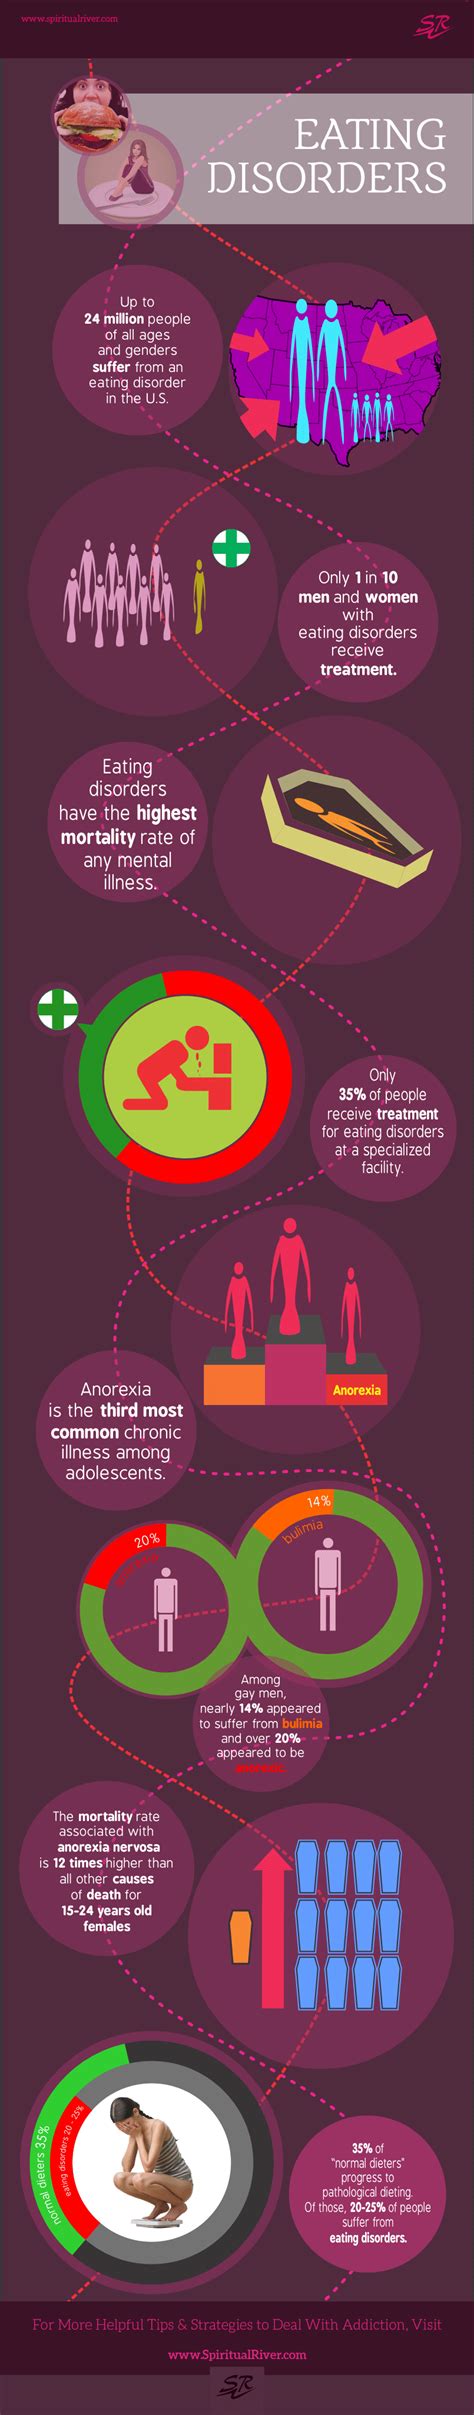 Eating Disorders And Addiction Infographic Infographic Plaza